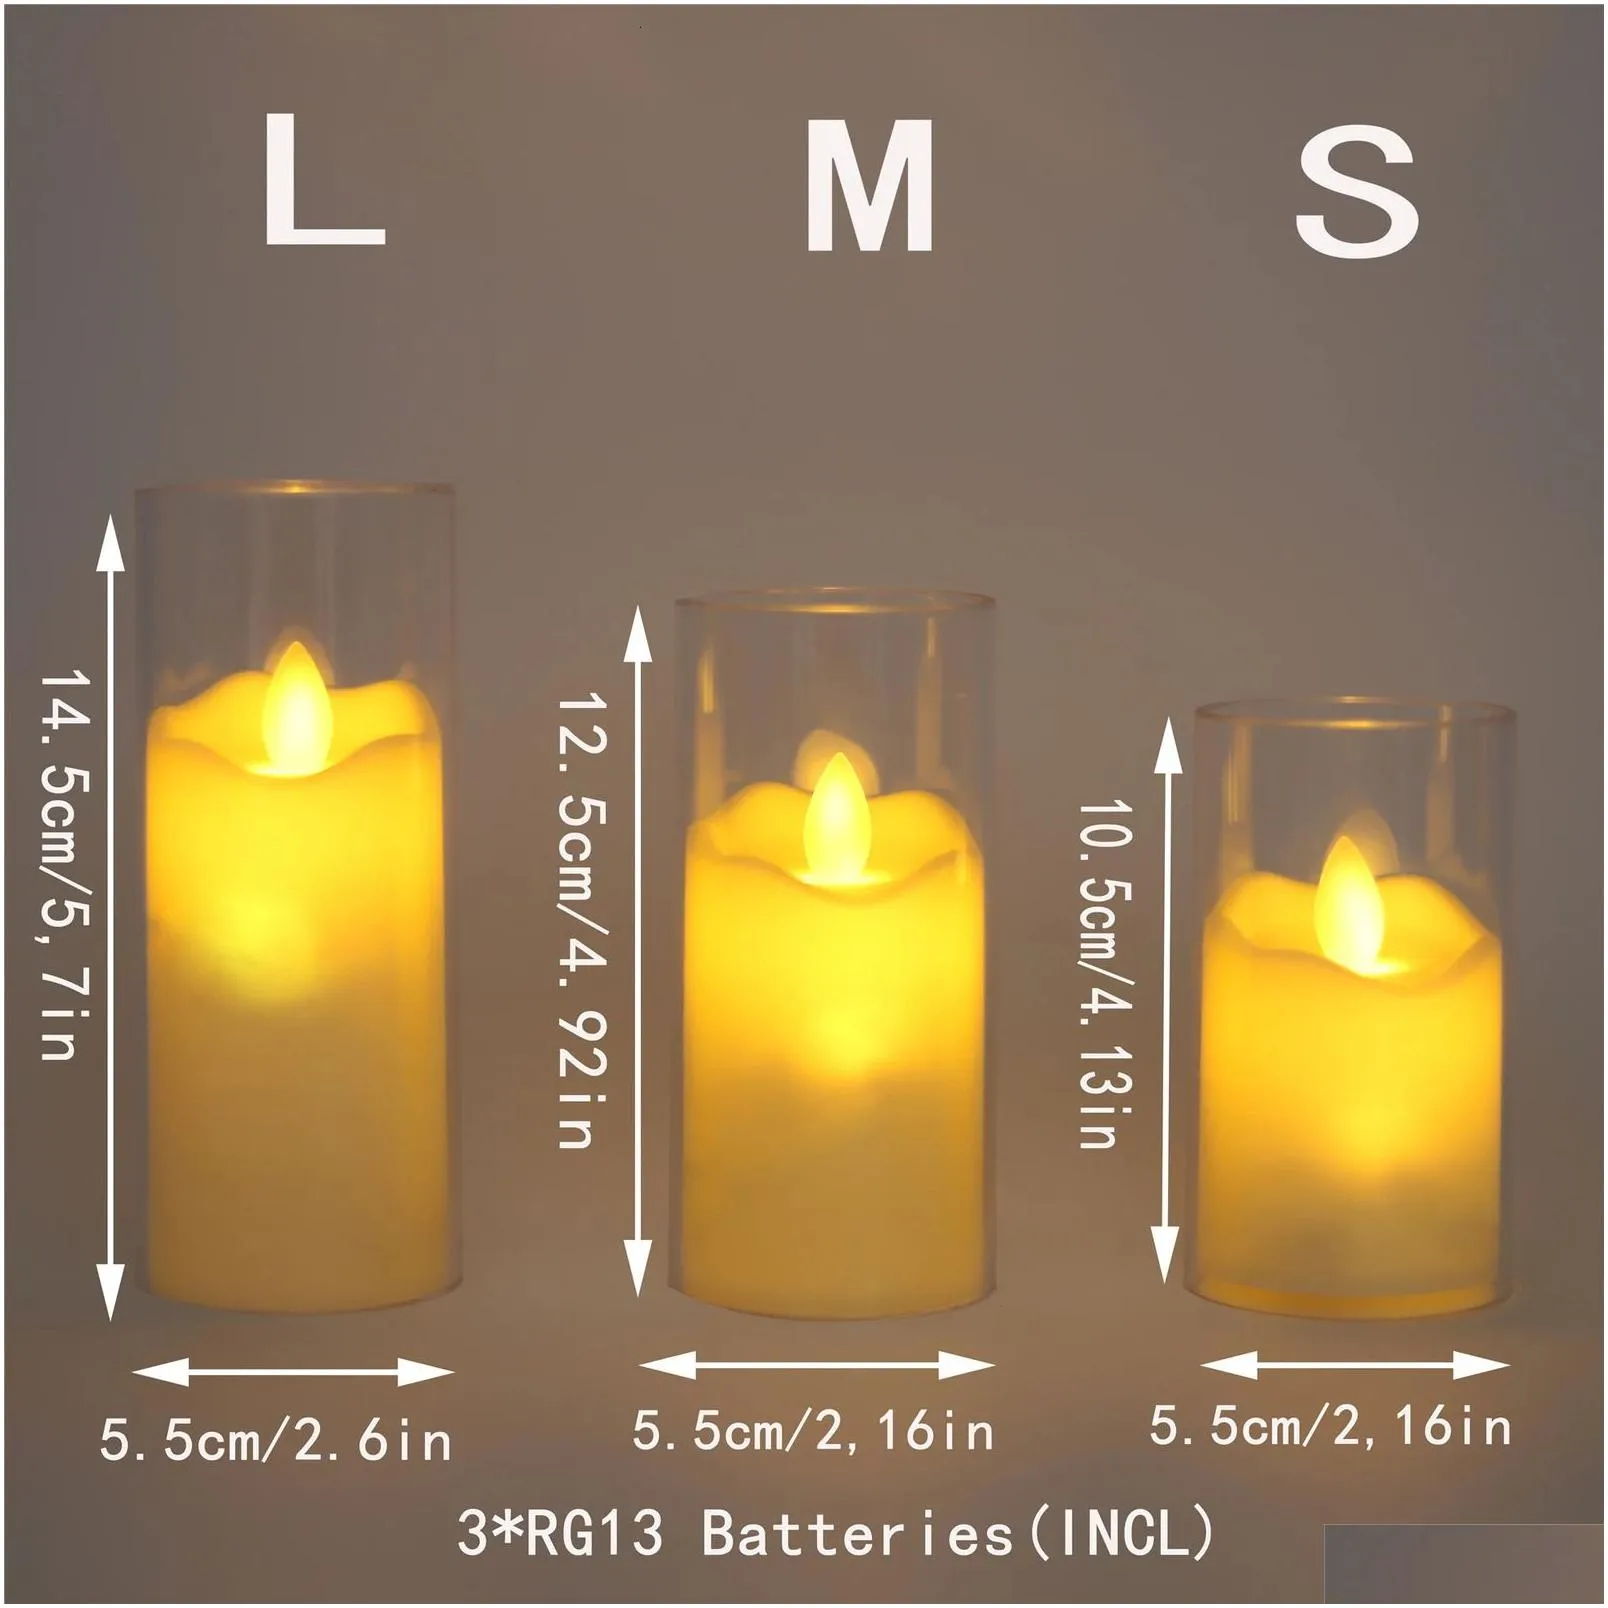 Candles Candles 6Pcs Led Flameless Electric Lamp Acrylic Glass Battery Flickering Fake Tealight Candle Bk For Wedding Christmas Drop D Dhlz9